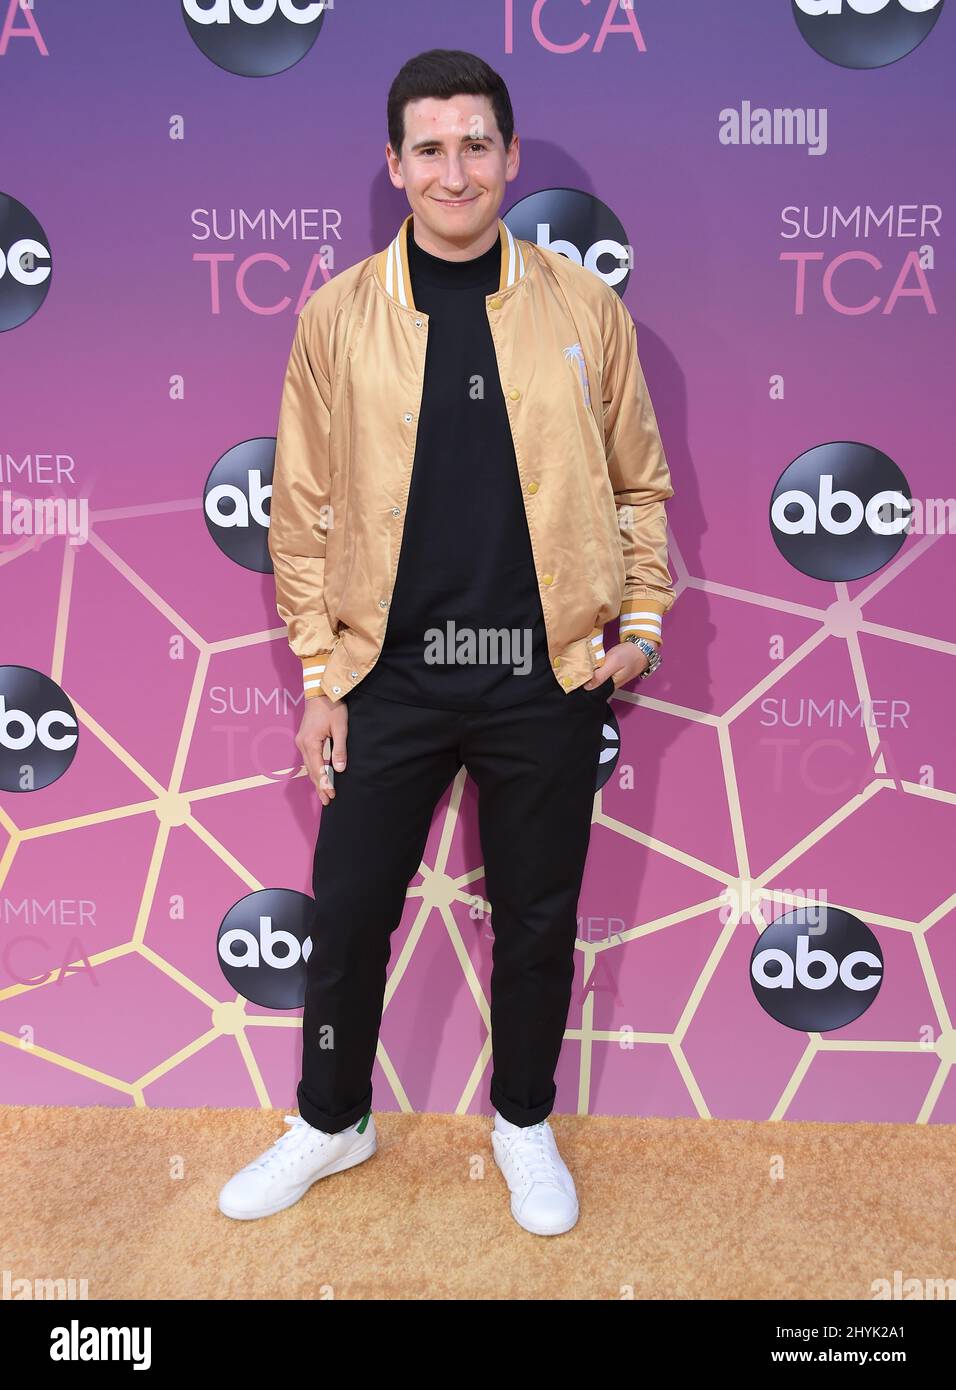 Sam Lerner arriving to the ABC's TCA Summer Press Tour Carpet Event at Soho House on August 05, 2019 in West Hollywood, Los Angeles. Stock Photo